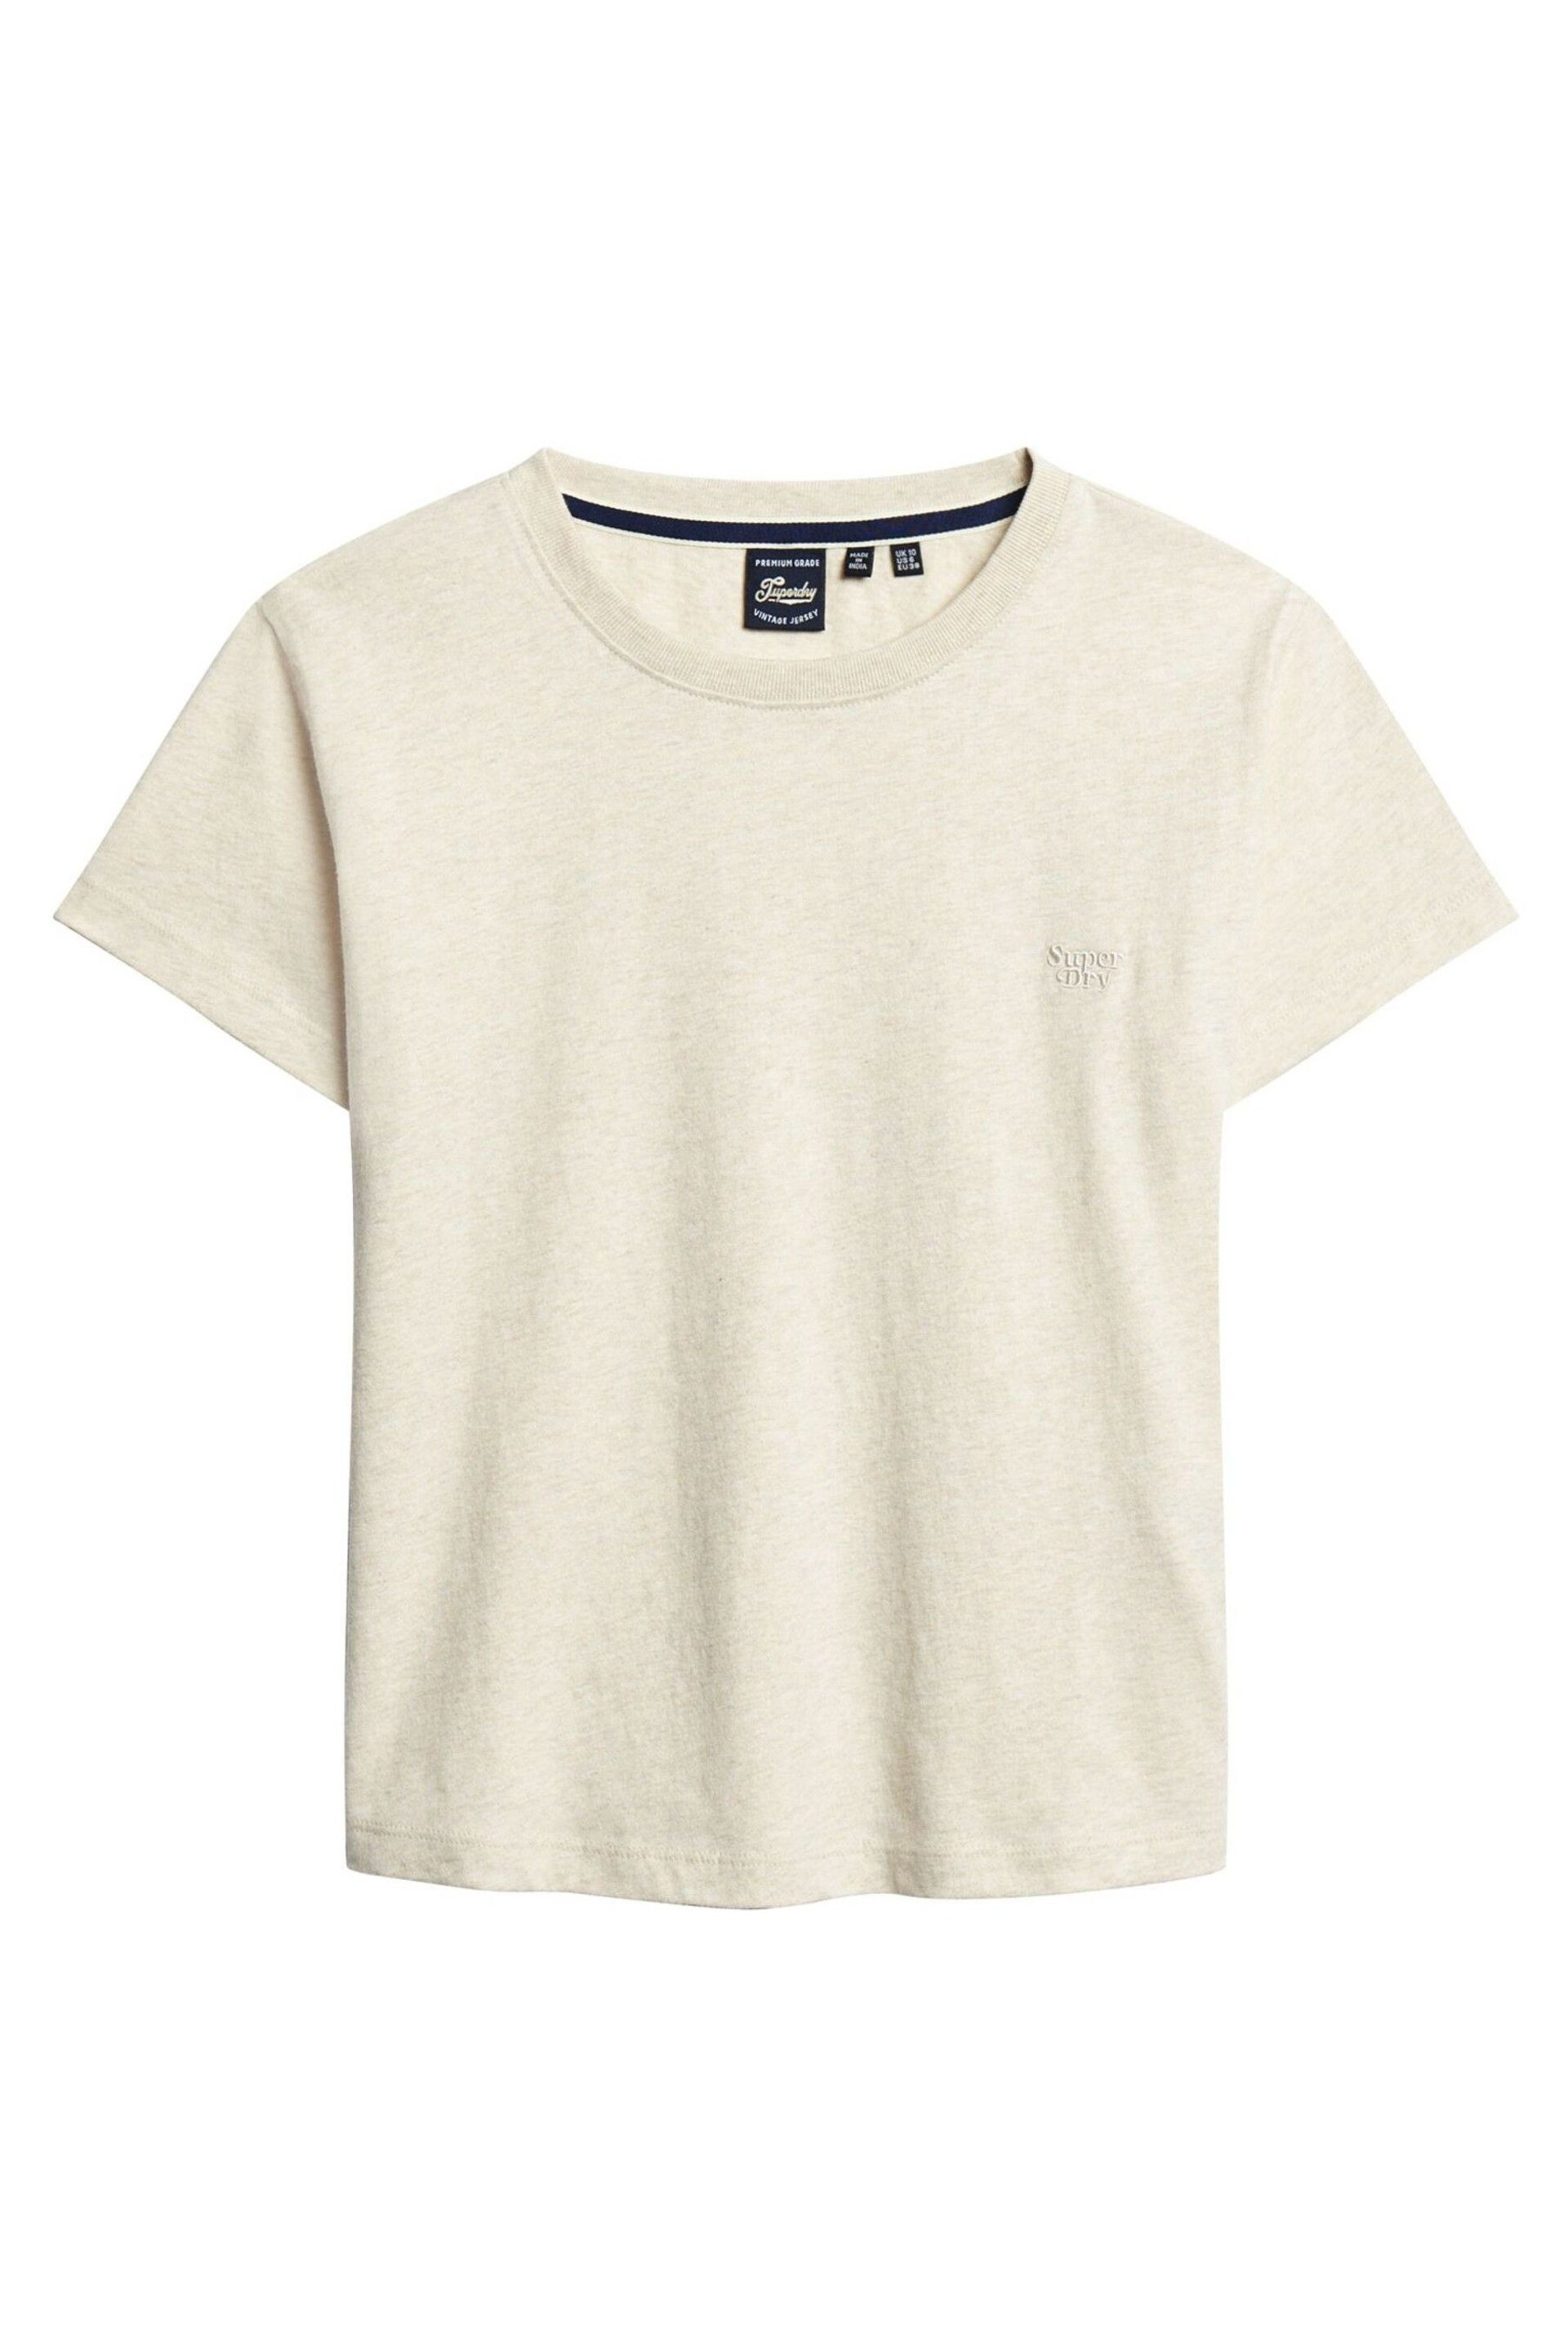 Superdry Nude Essential Logo 90's T-Shirt - Image 4 of 5